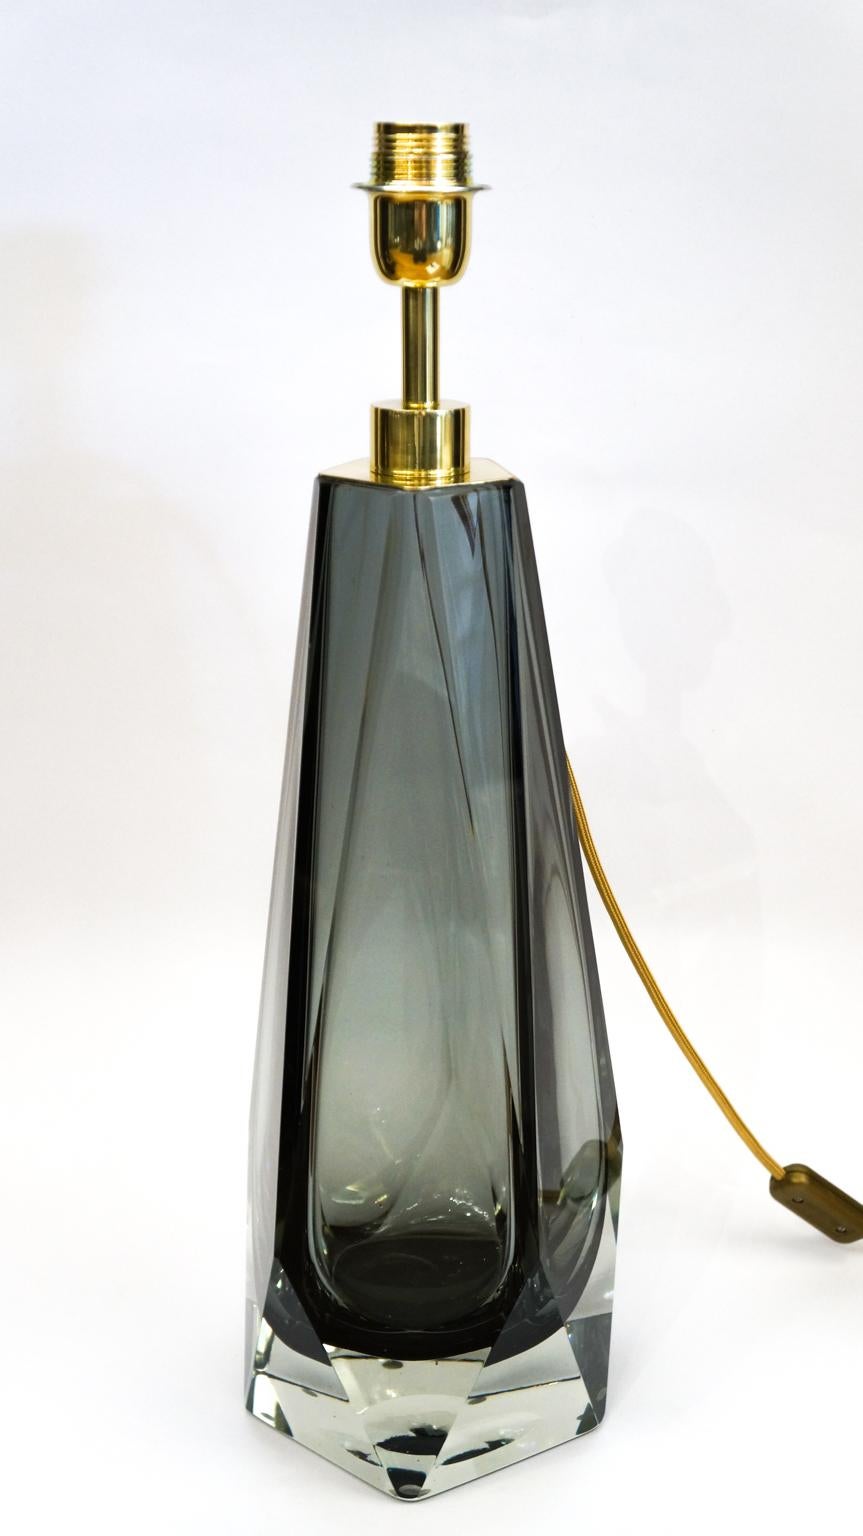 This table lamp is part of the collection of the glass master Alberto Donà which includes three lamps of different sizes called 